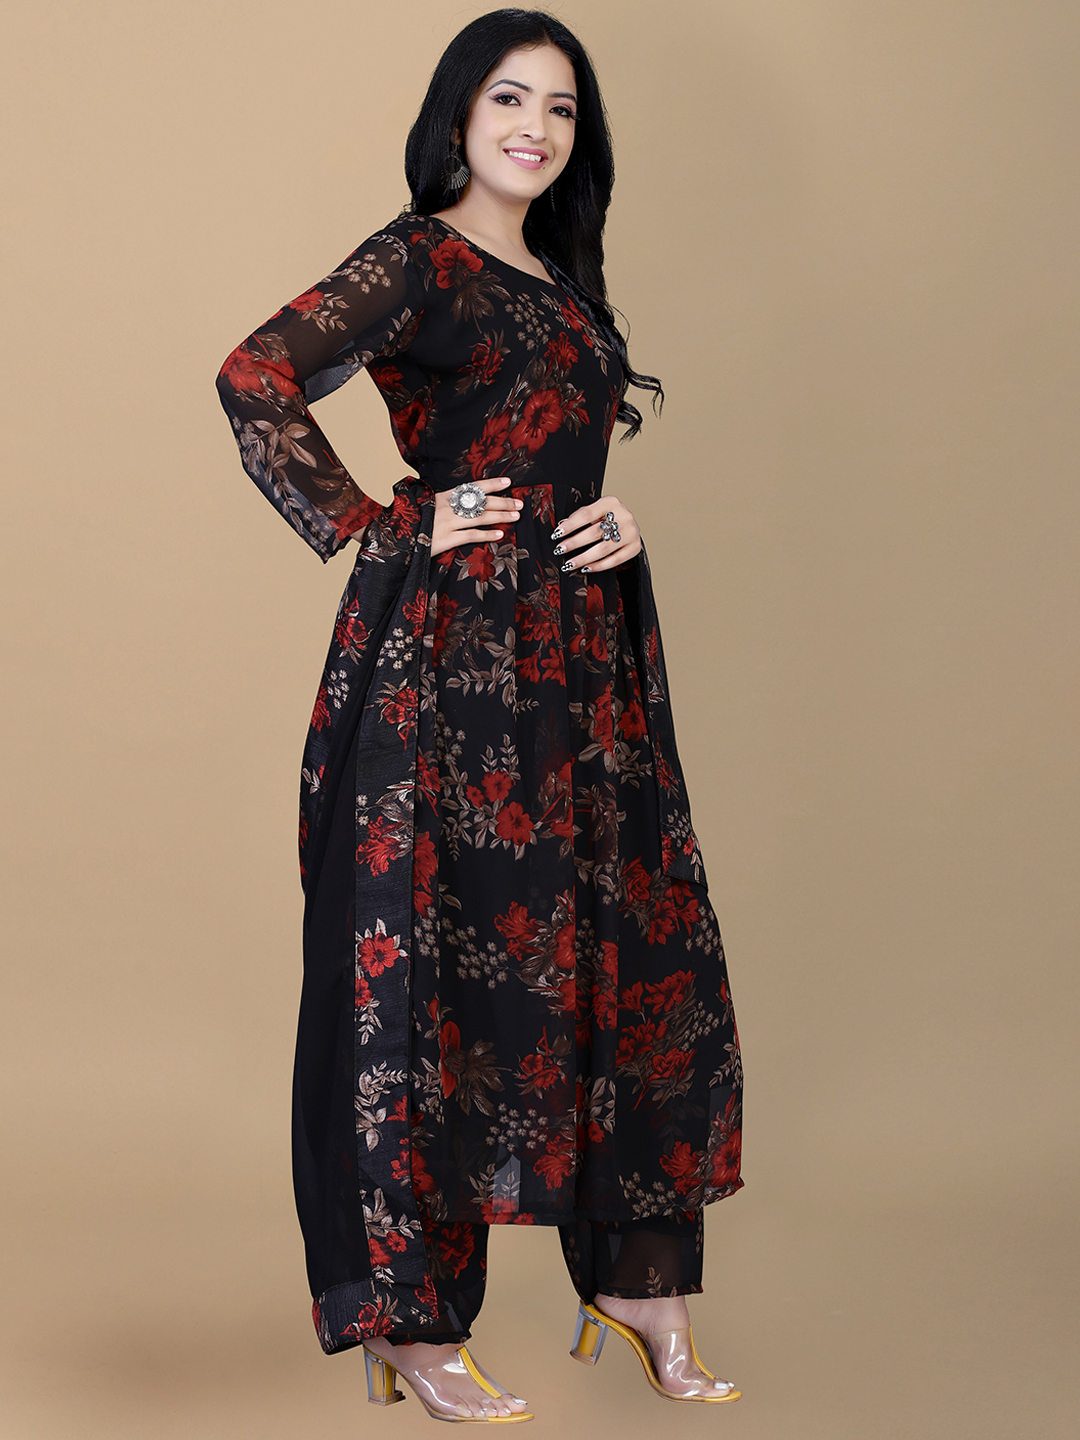 NEW LETEST PRETTY FLORAL DESIGNER WOMAN GOWNS